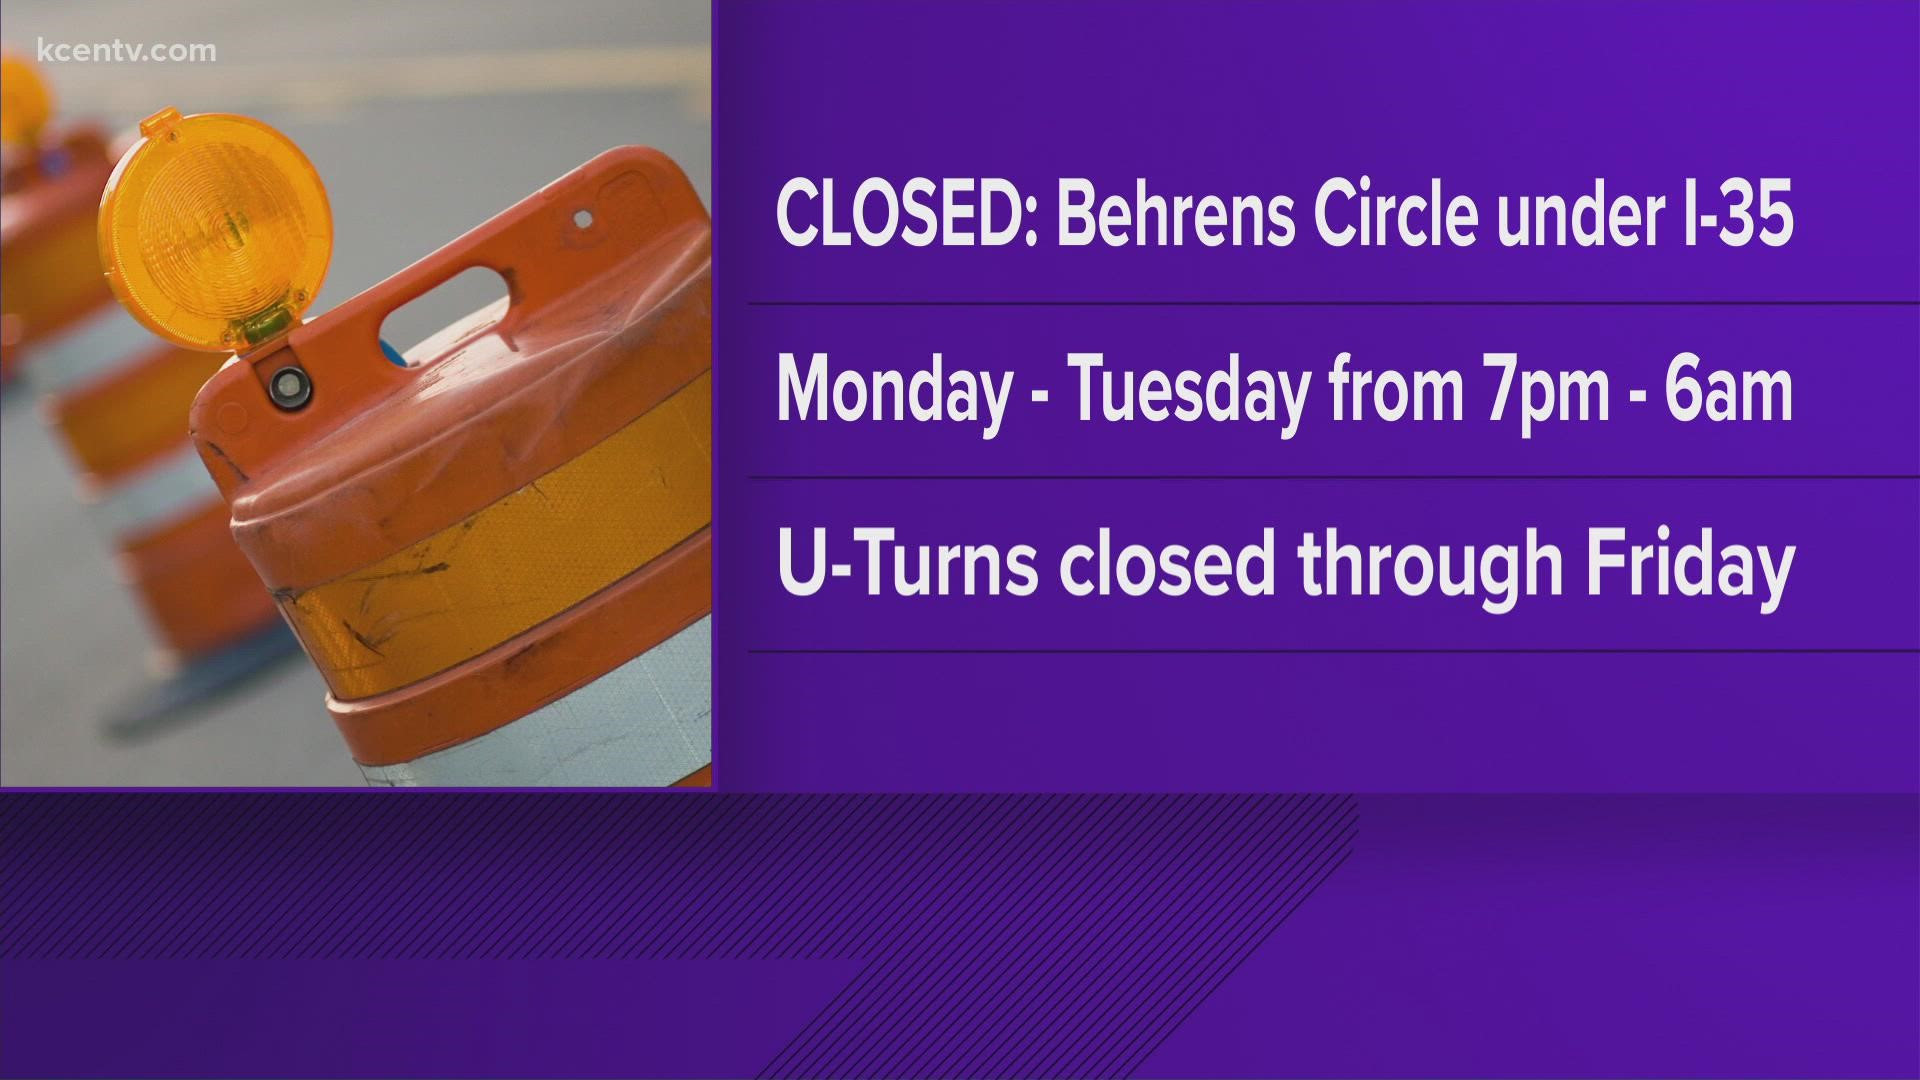 Drivers in Waco should expect road closures especially around the Behrens Circle area.